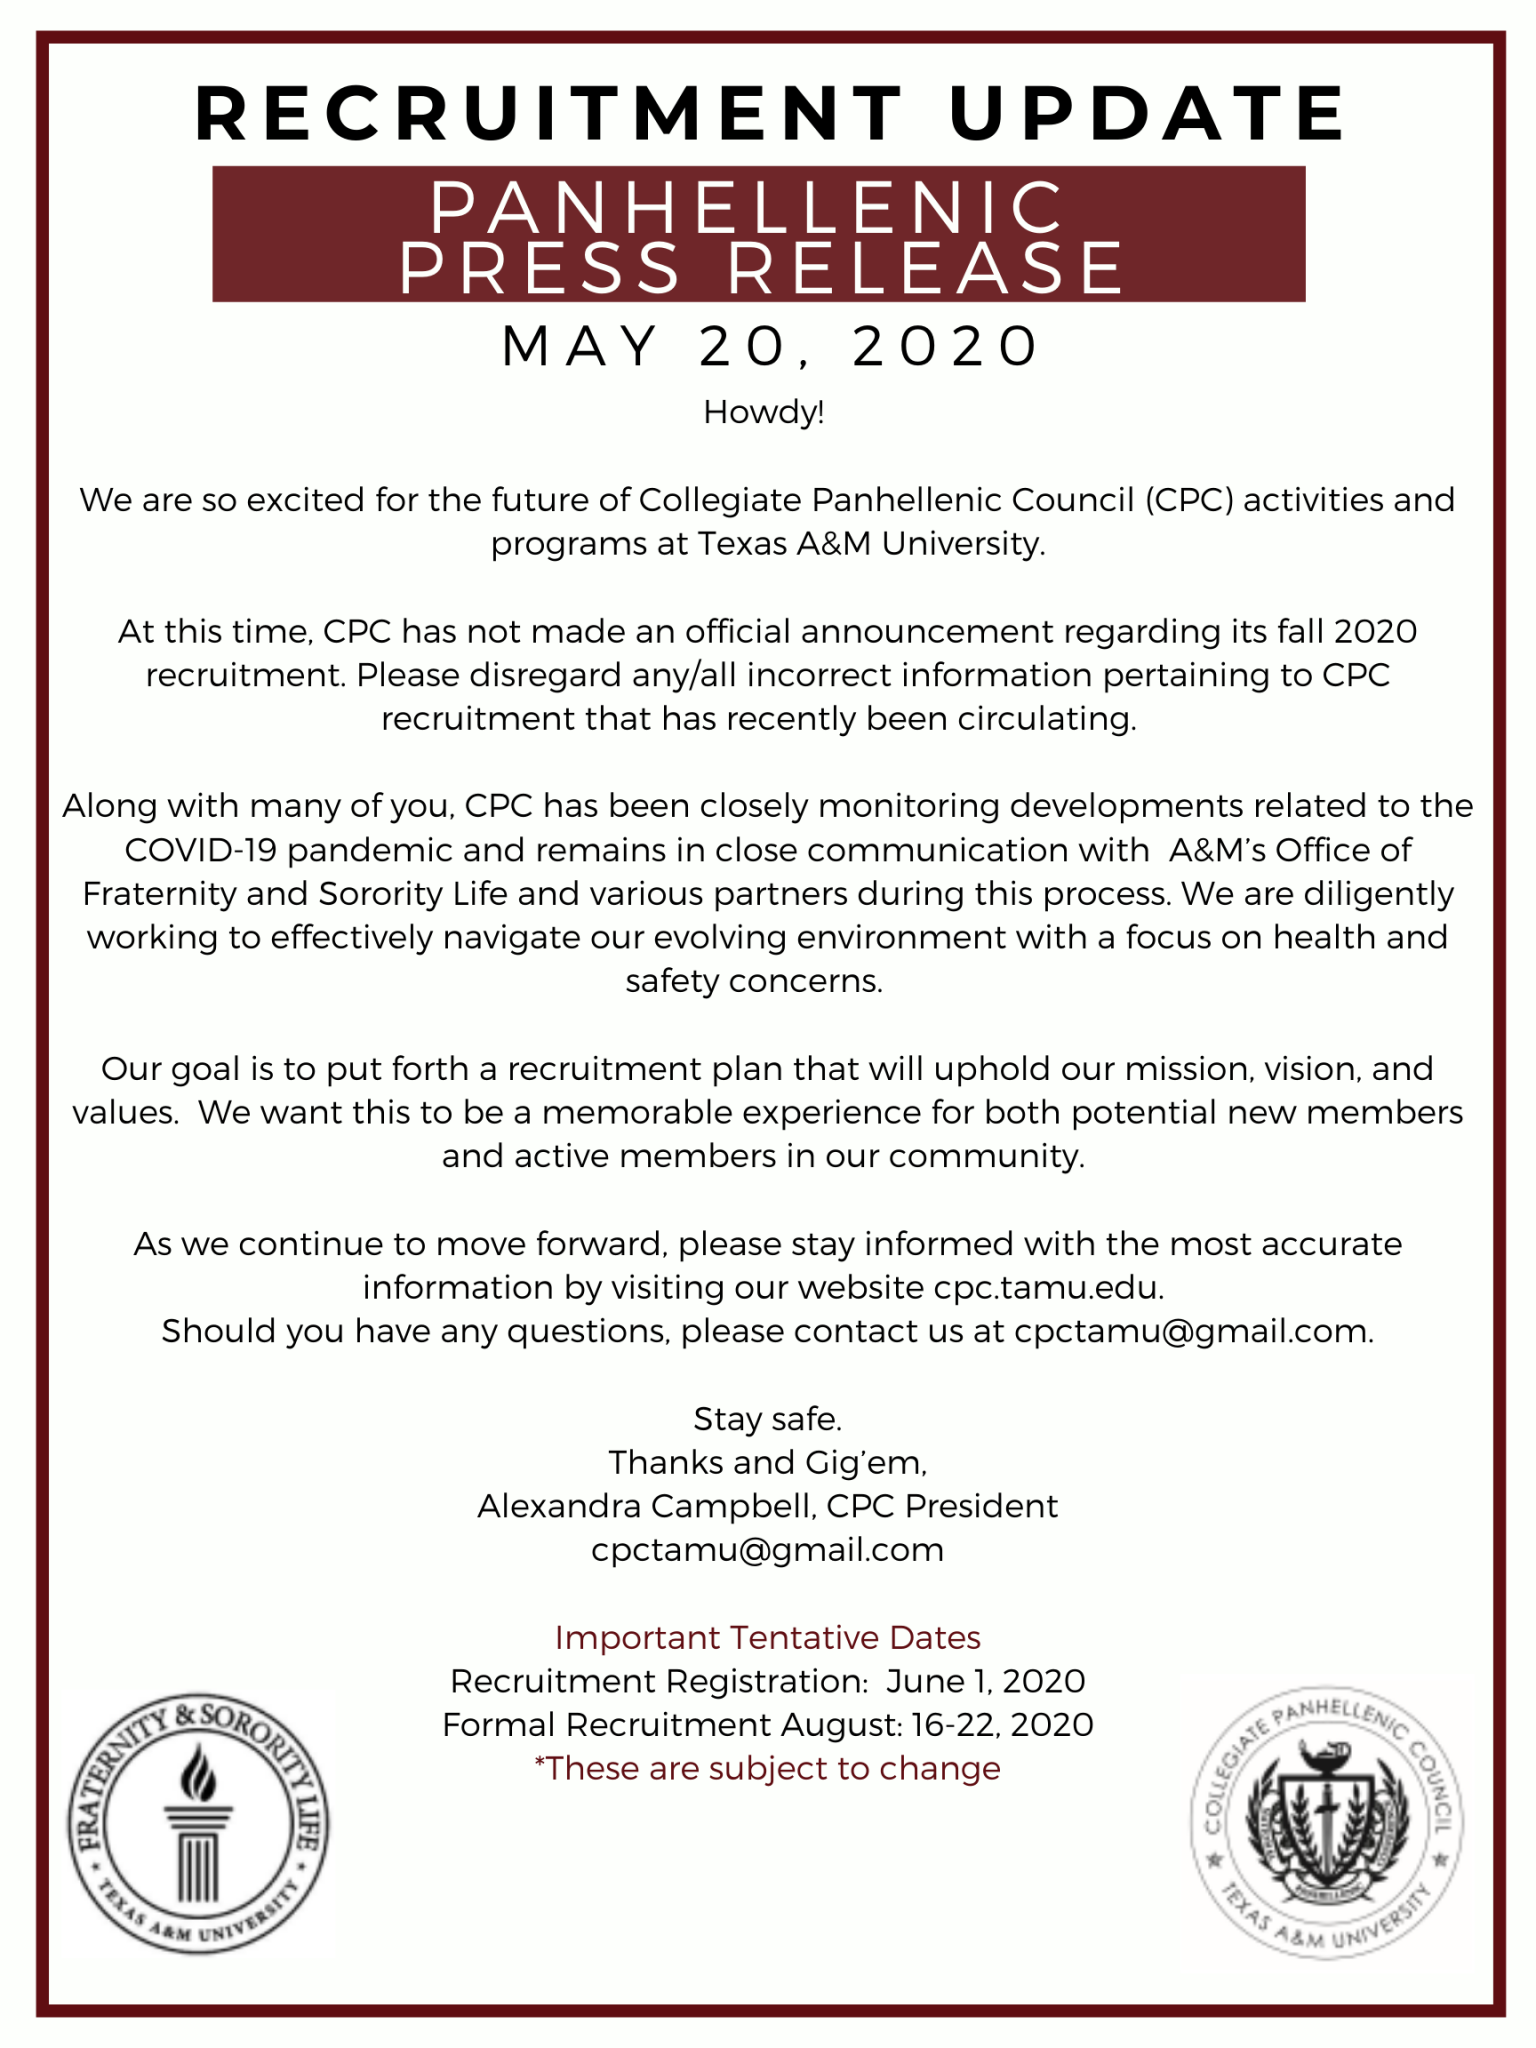 Press Releases & COVID19 Updates Texas A&M Panhellenic